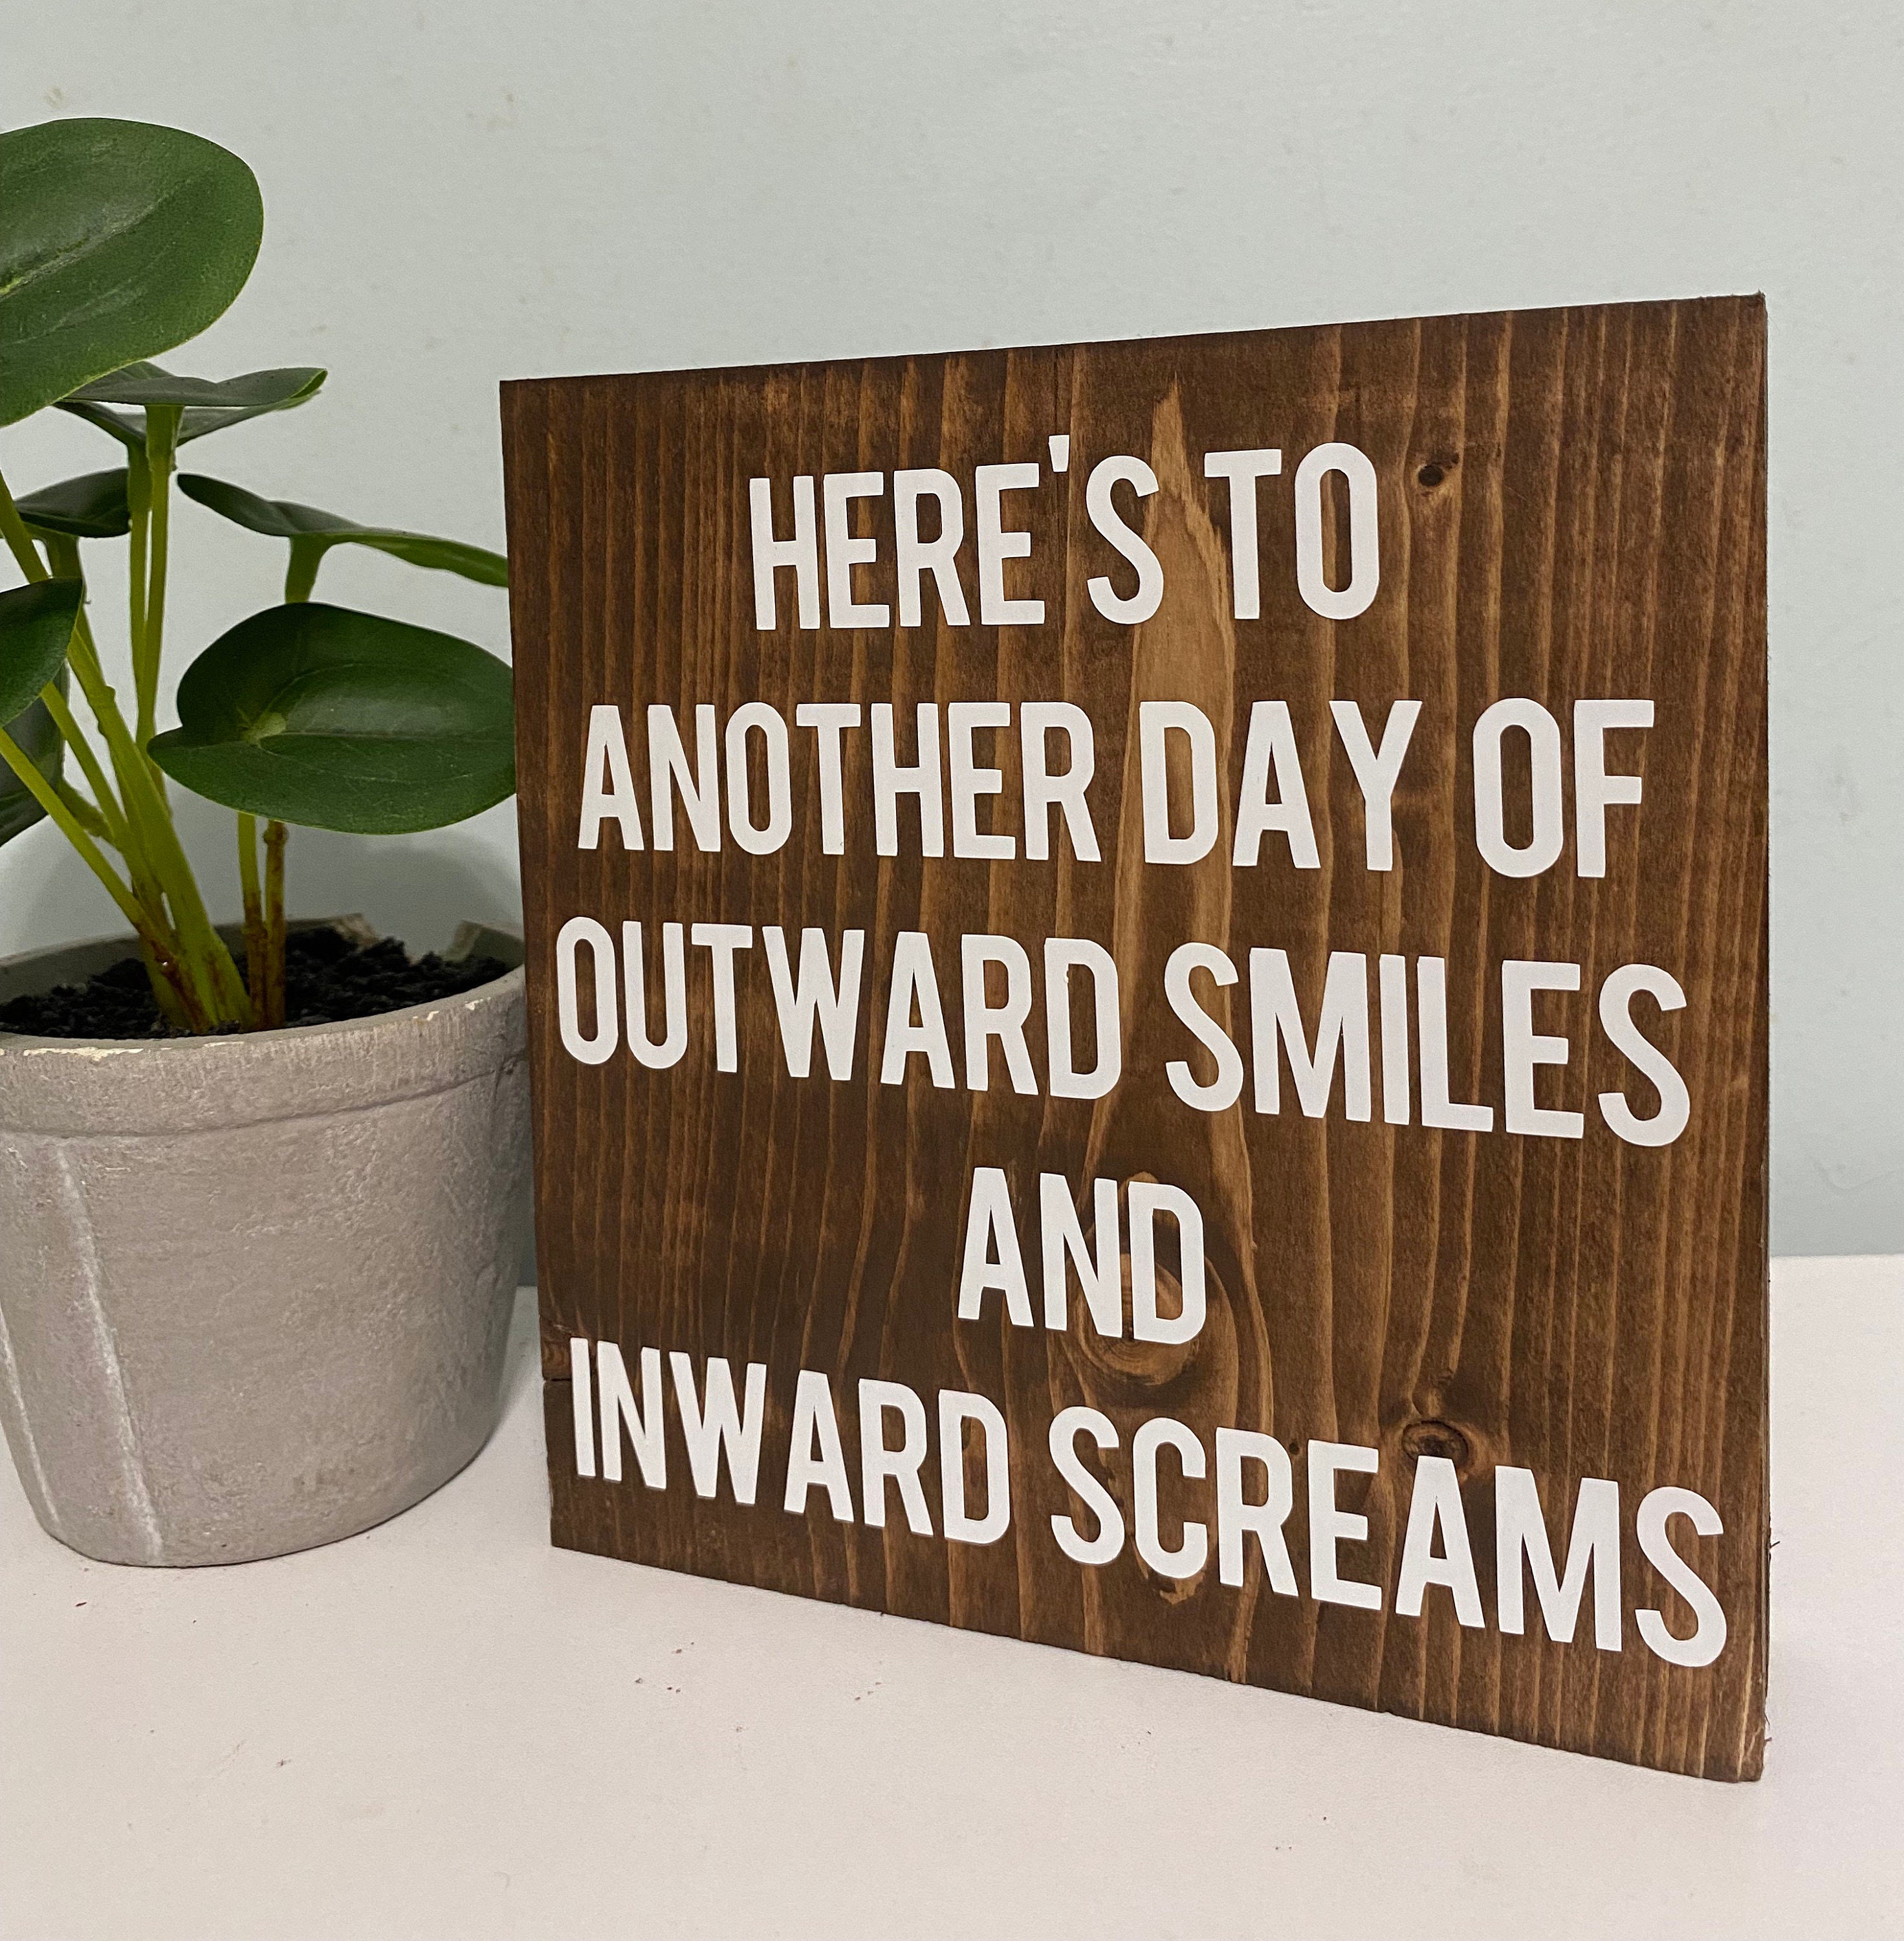 Heres to Another Day of Outward Smiles and Inward Screams - Etsy